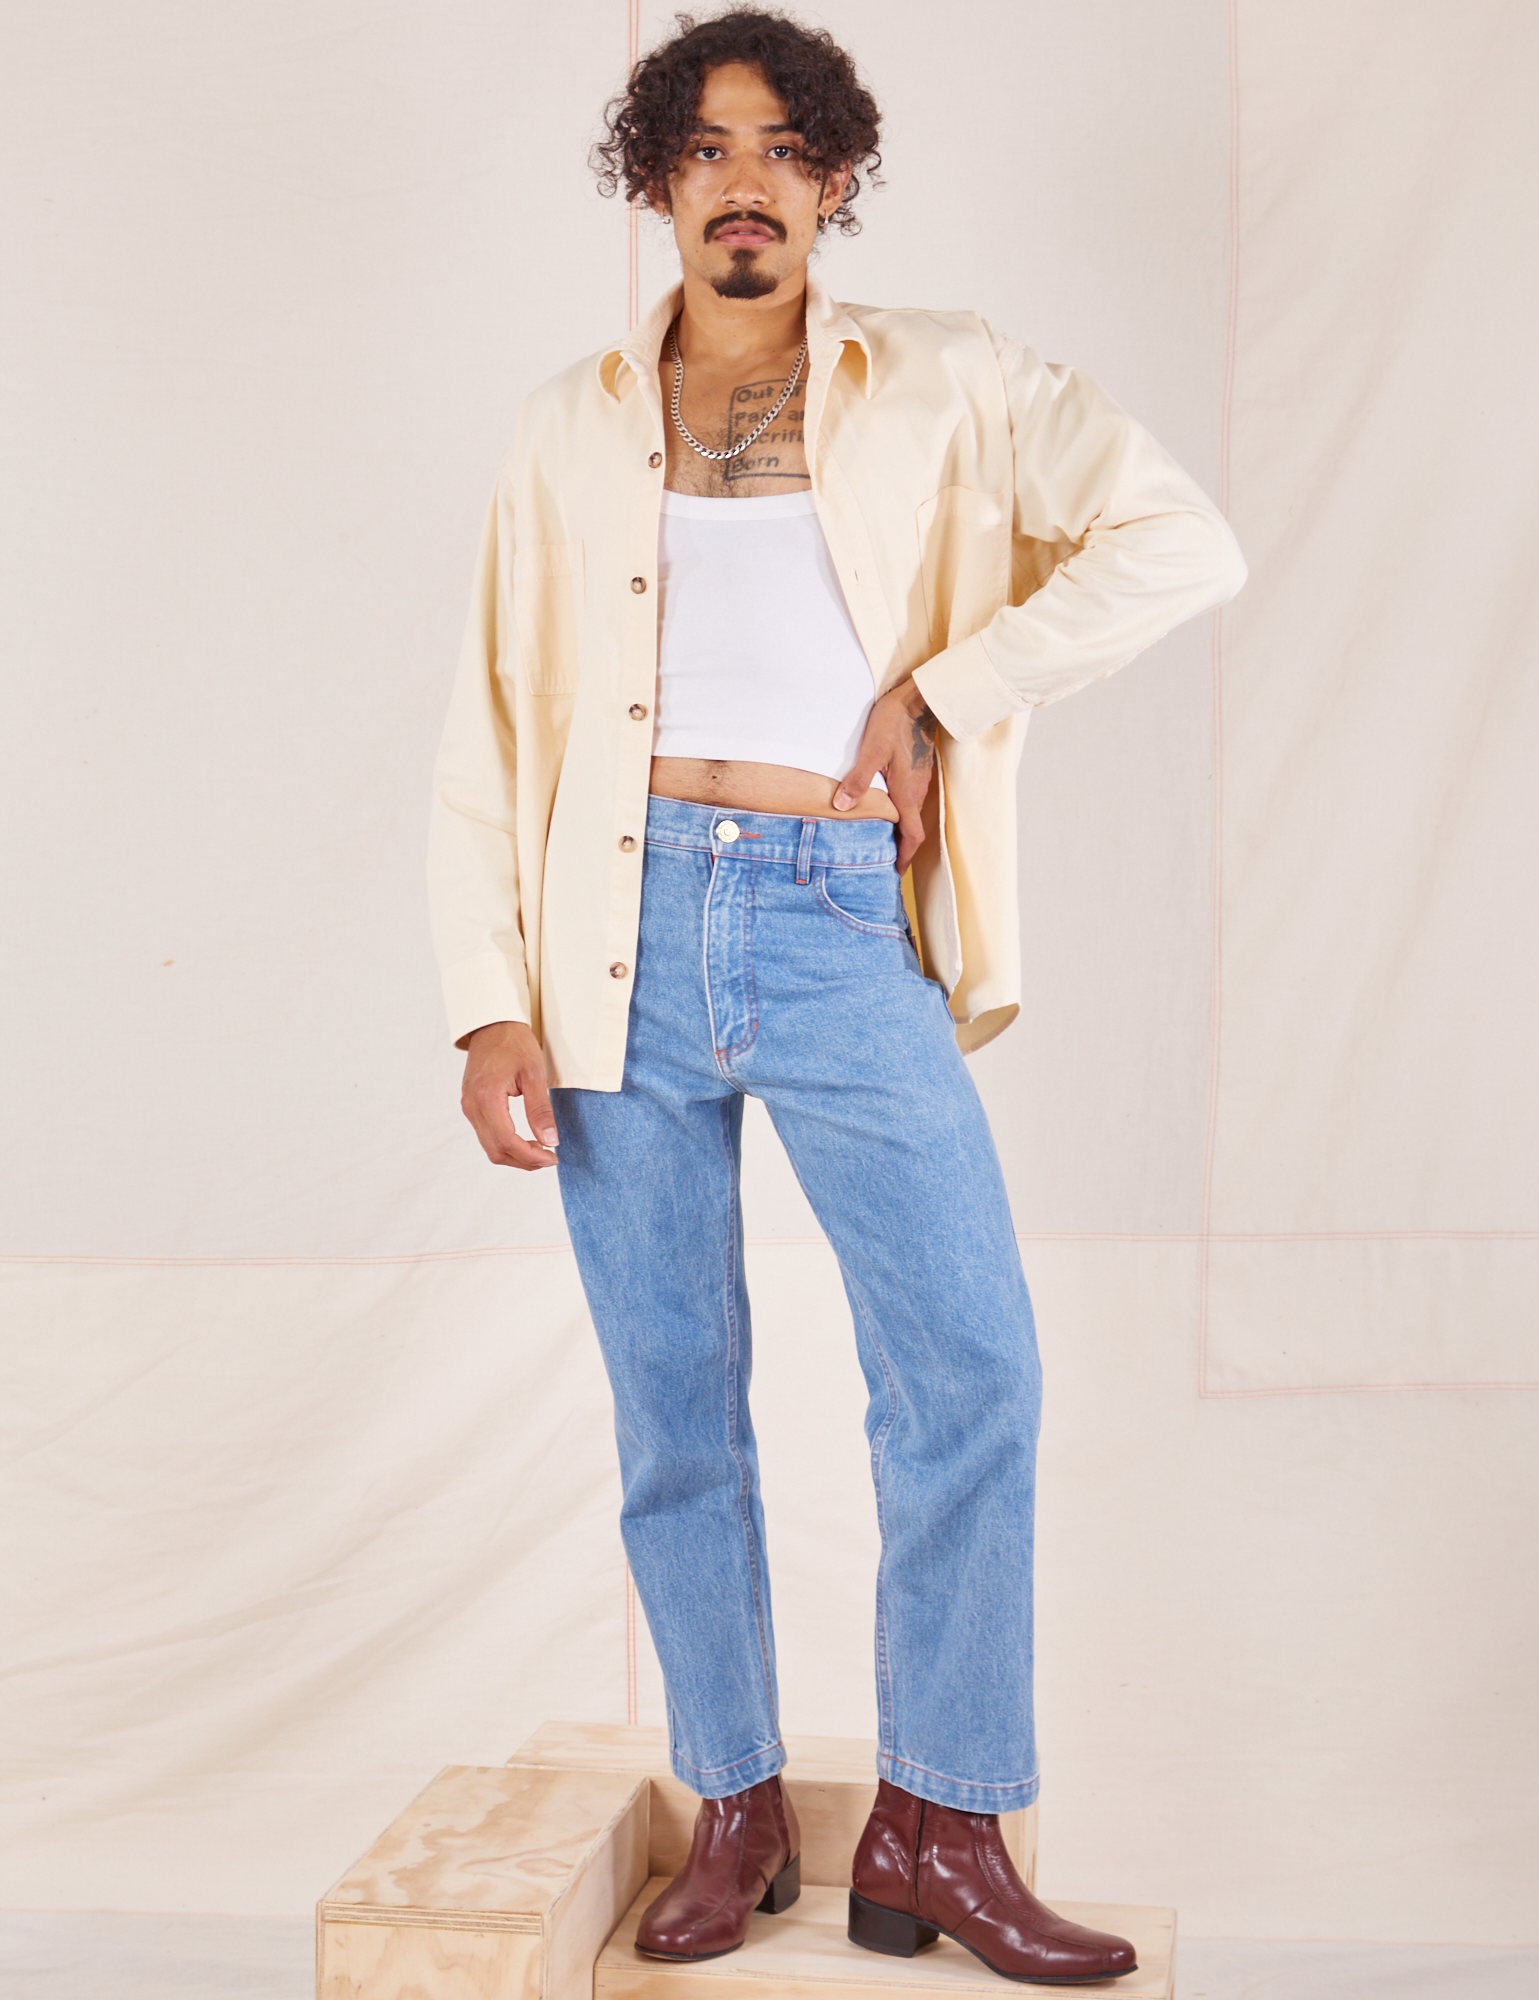 Jesse is wearing Oversize Overshirt in Vintage Tee Off-White and light wash Frontier Jeans